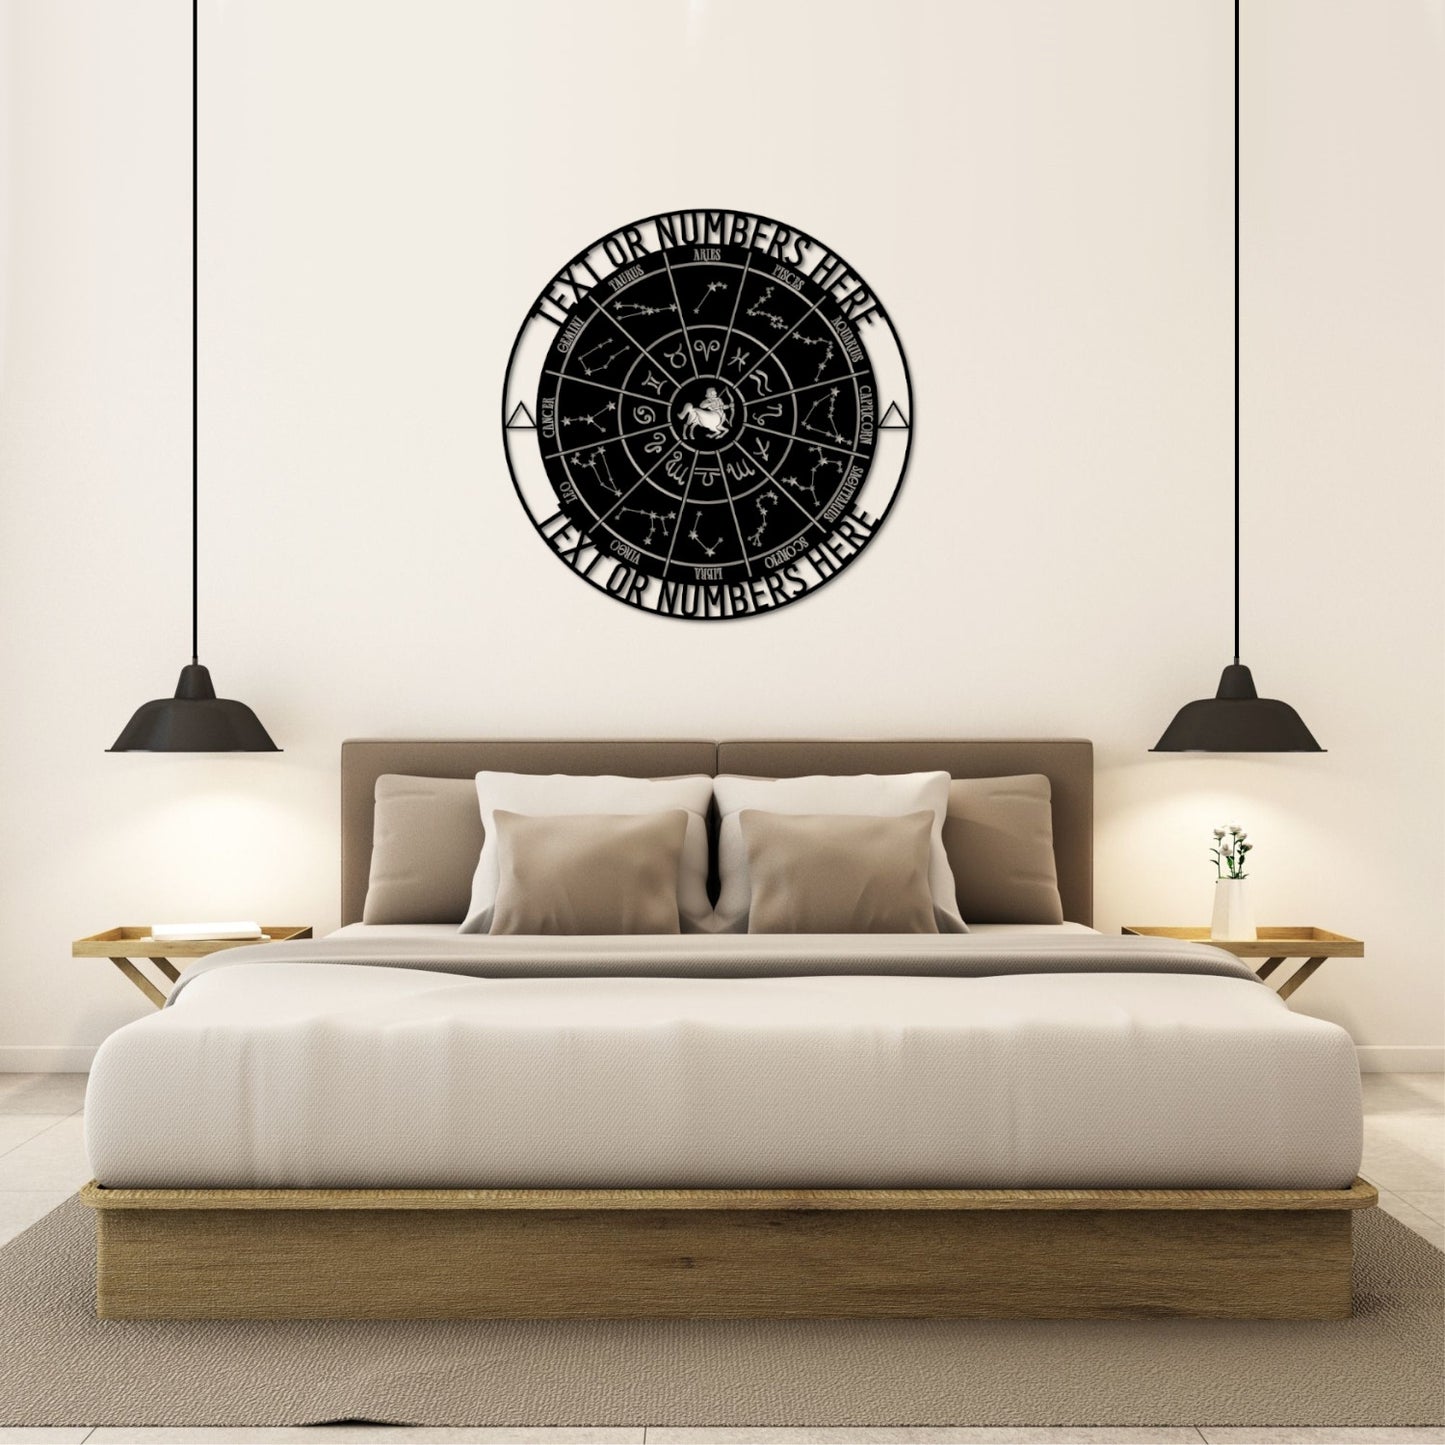 Personalized Sagittarius Zodiac Wheel Name Metal Sign Gift. Custom Astrology Wall Decor. Celestial Gifts. Decorative Star Sign Wall Hanging